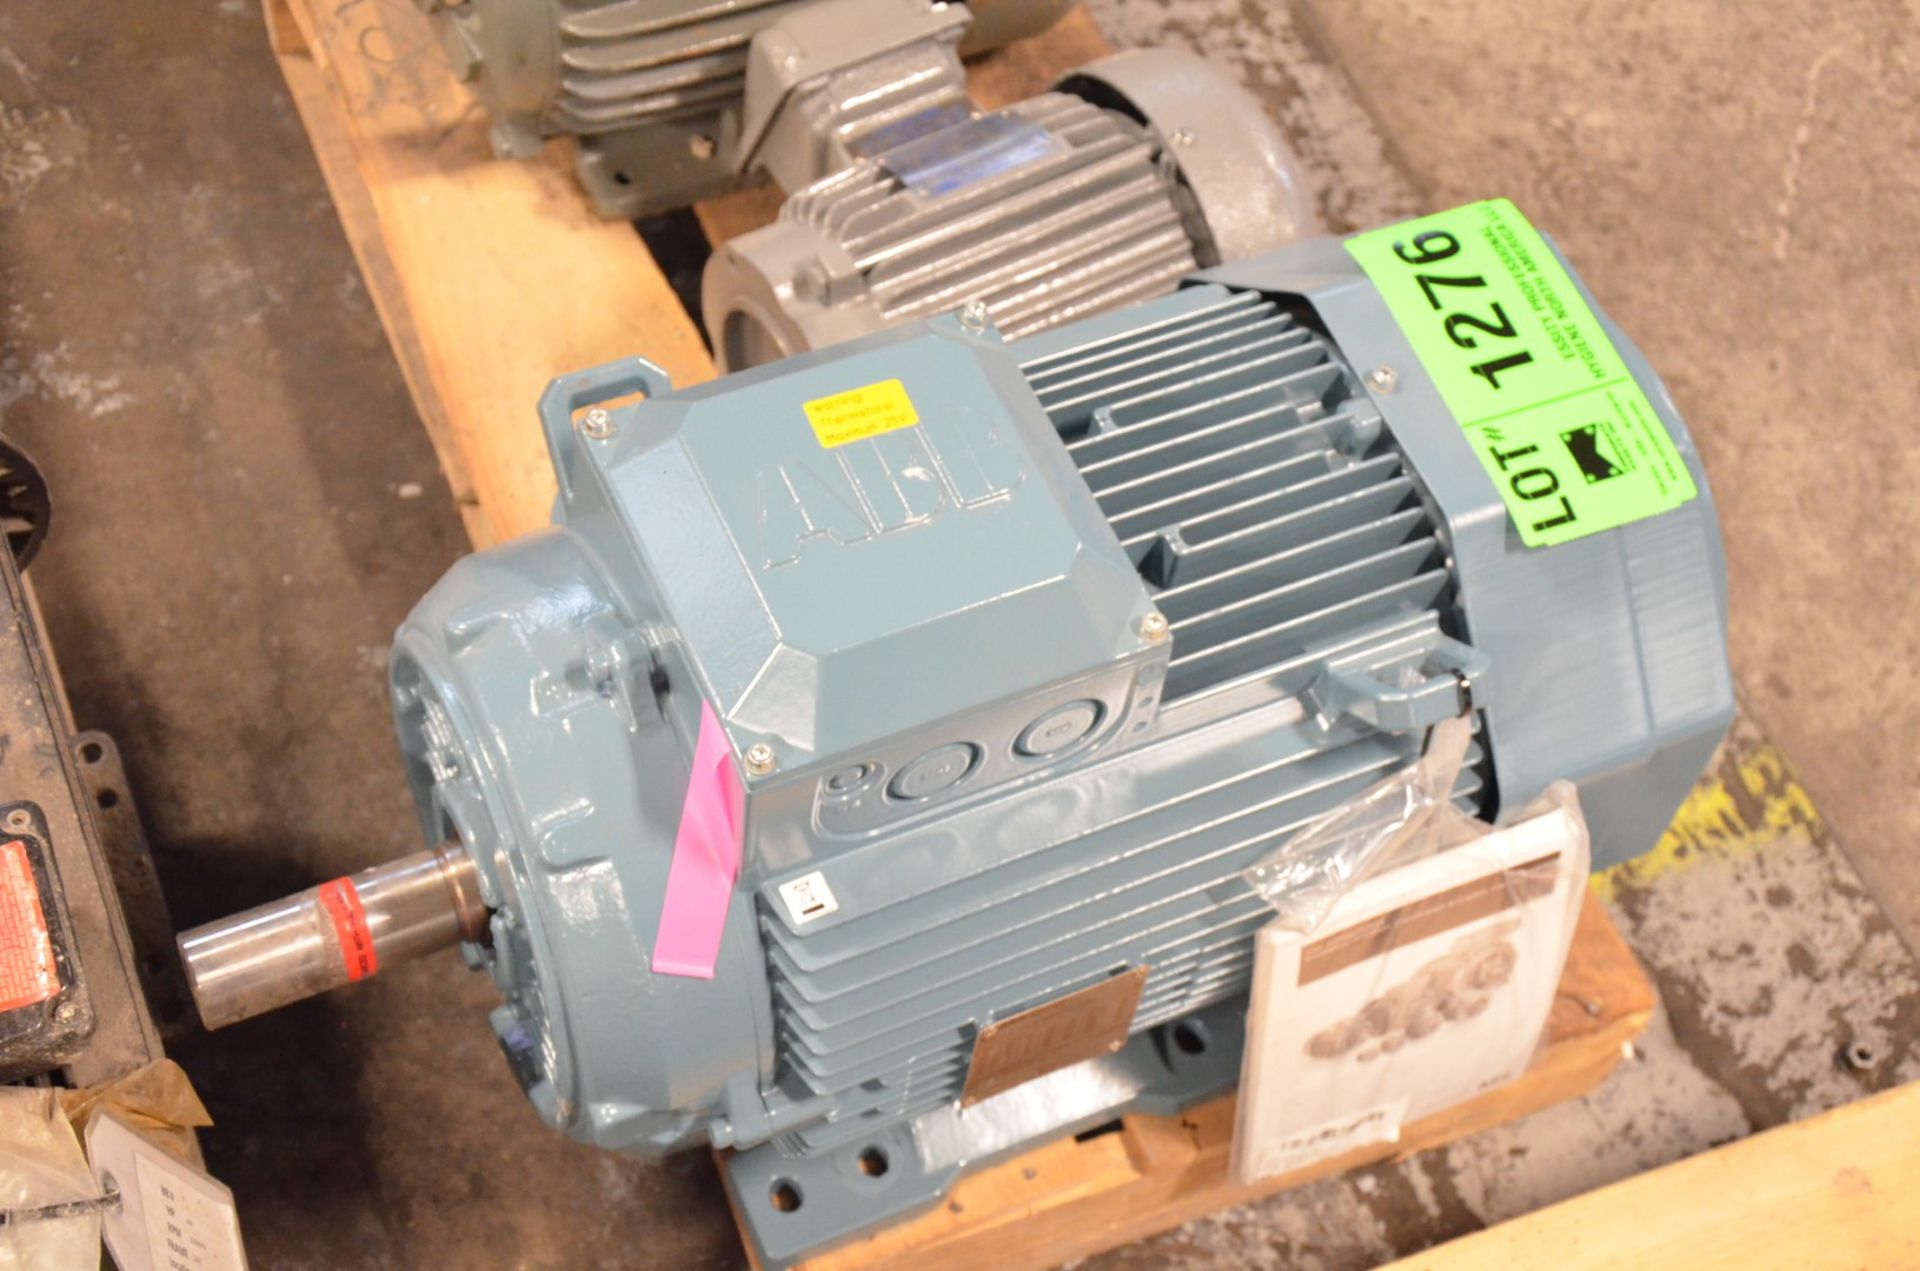 ABB 11 KW 460V 1183 RPM ELECTRIC MOTOR [RIGGING FEE FOR LOT #1276 - $25 USD PLUS APPLICABLE TAXES] - Image 2 of 3